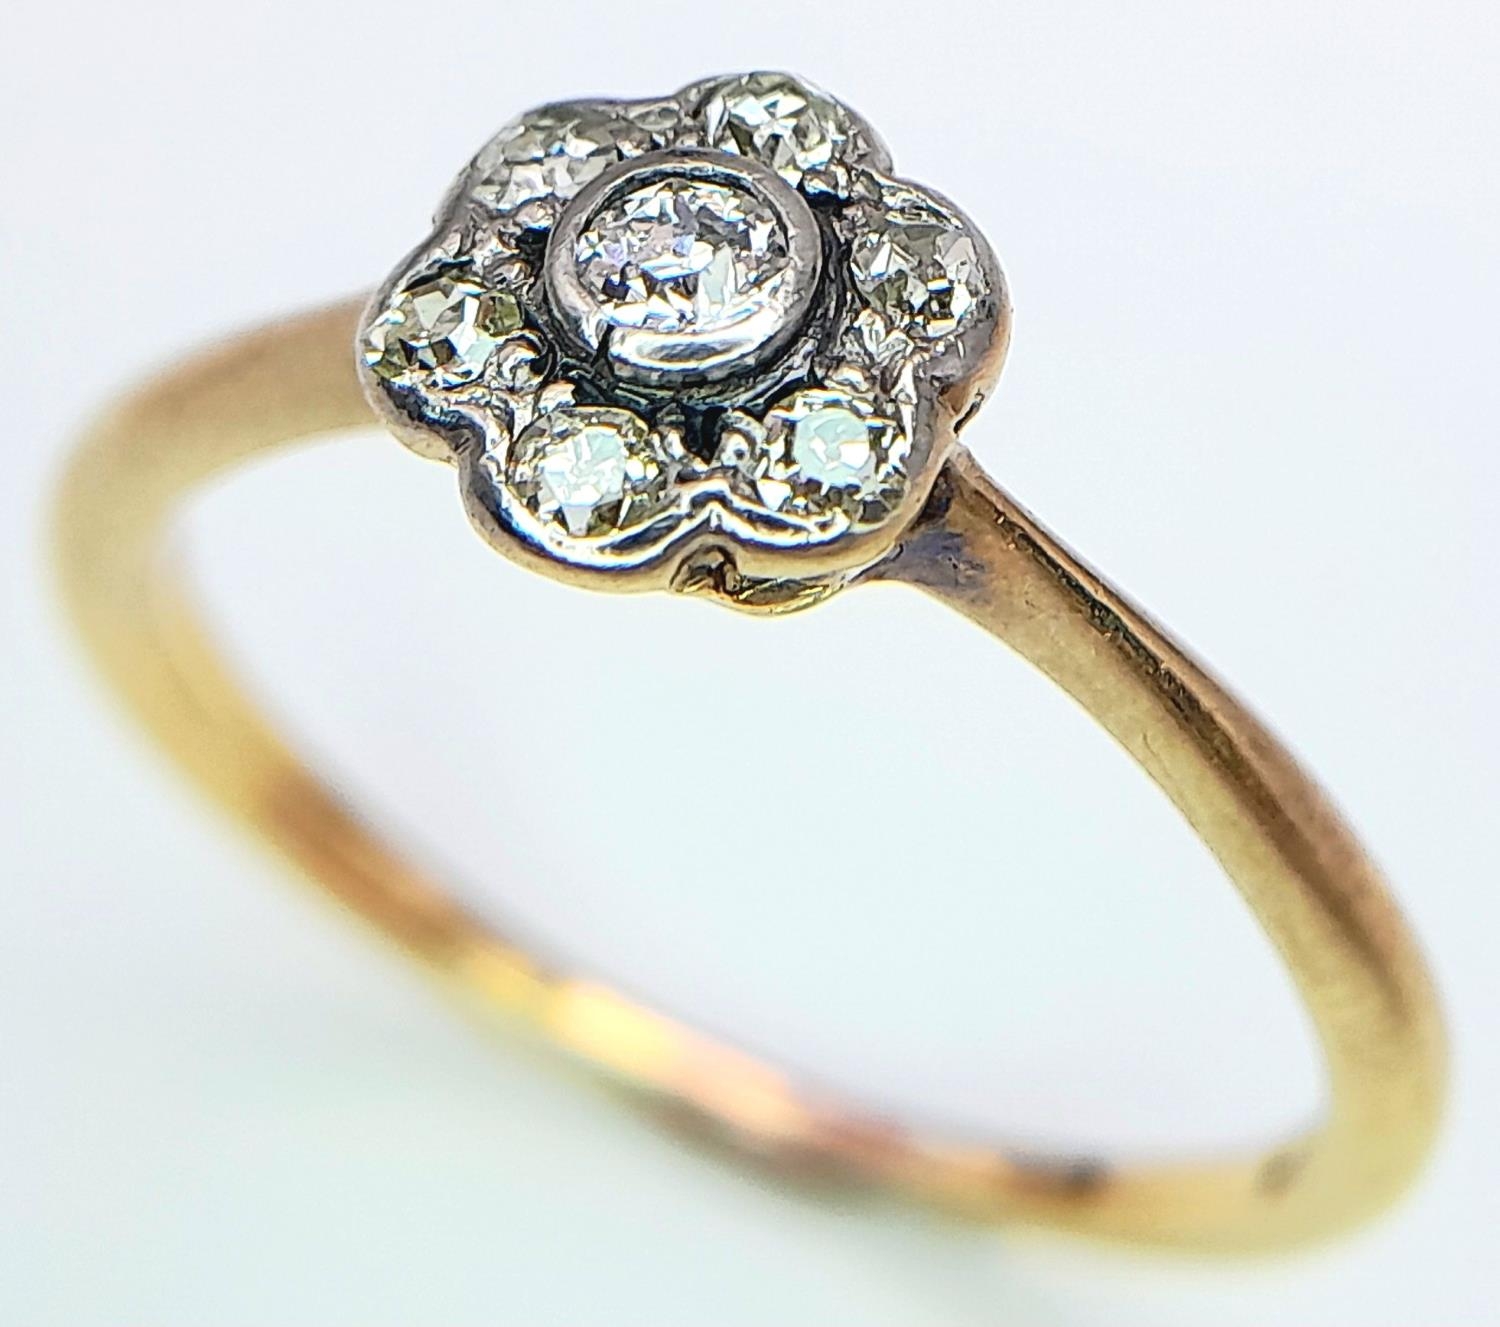 An Antique 18K Yellow Gold Old Cut Diamond Cluster Ring. Size N, 2.05g total weight. - Image 3 of 5